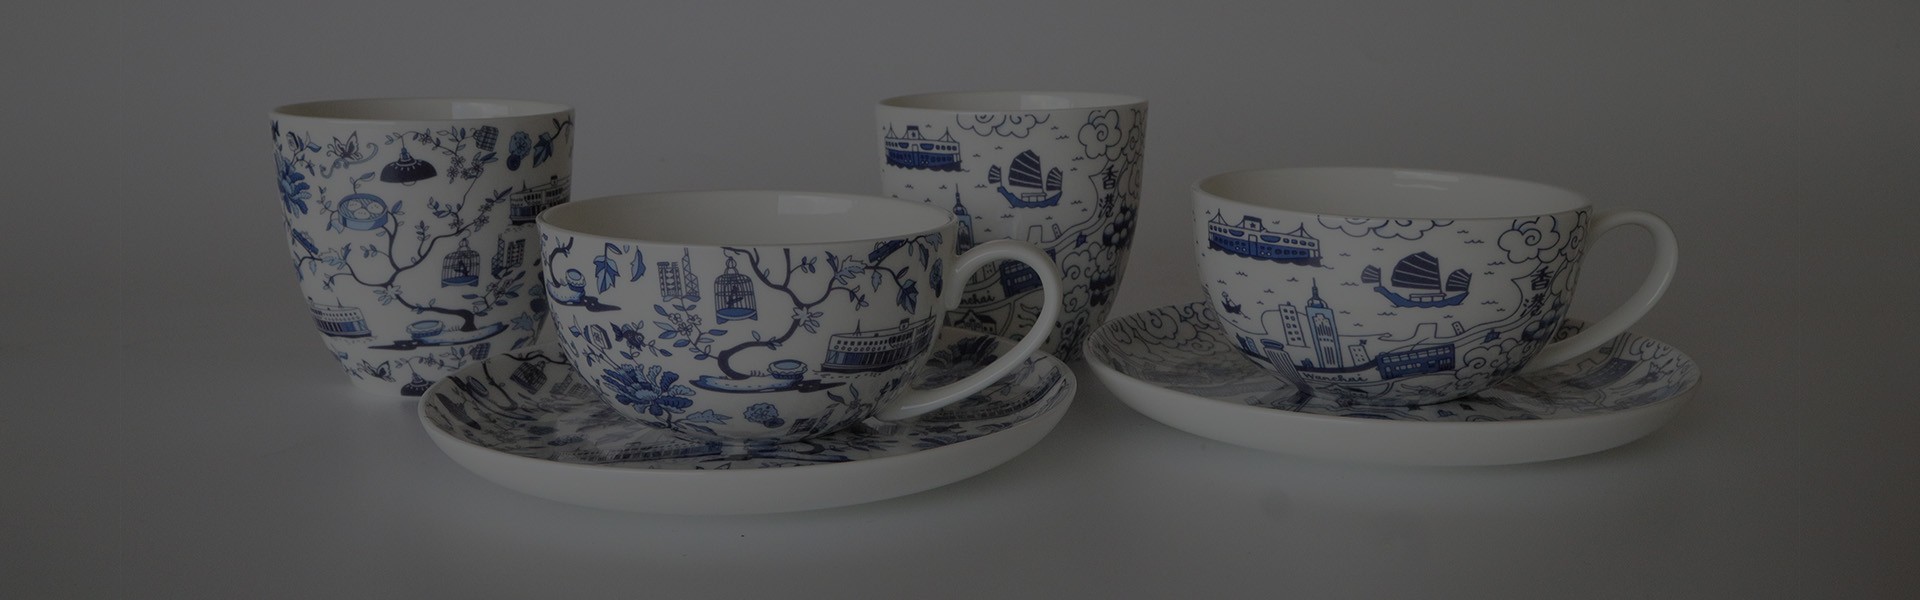 Cups and Saucers / East-Meets-West Cups